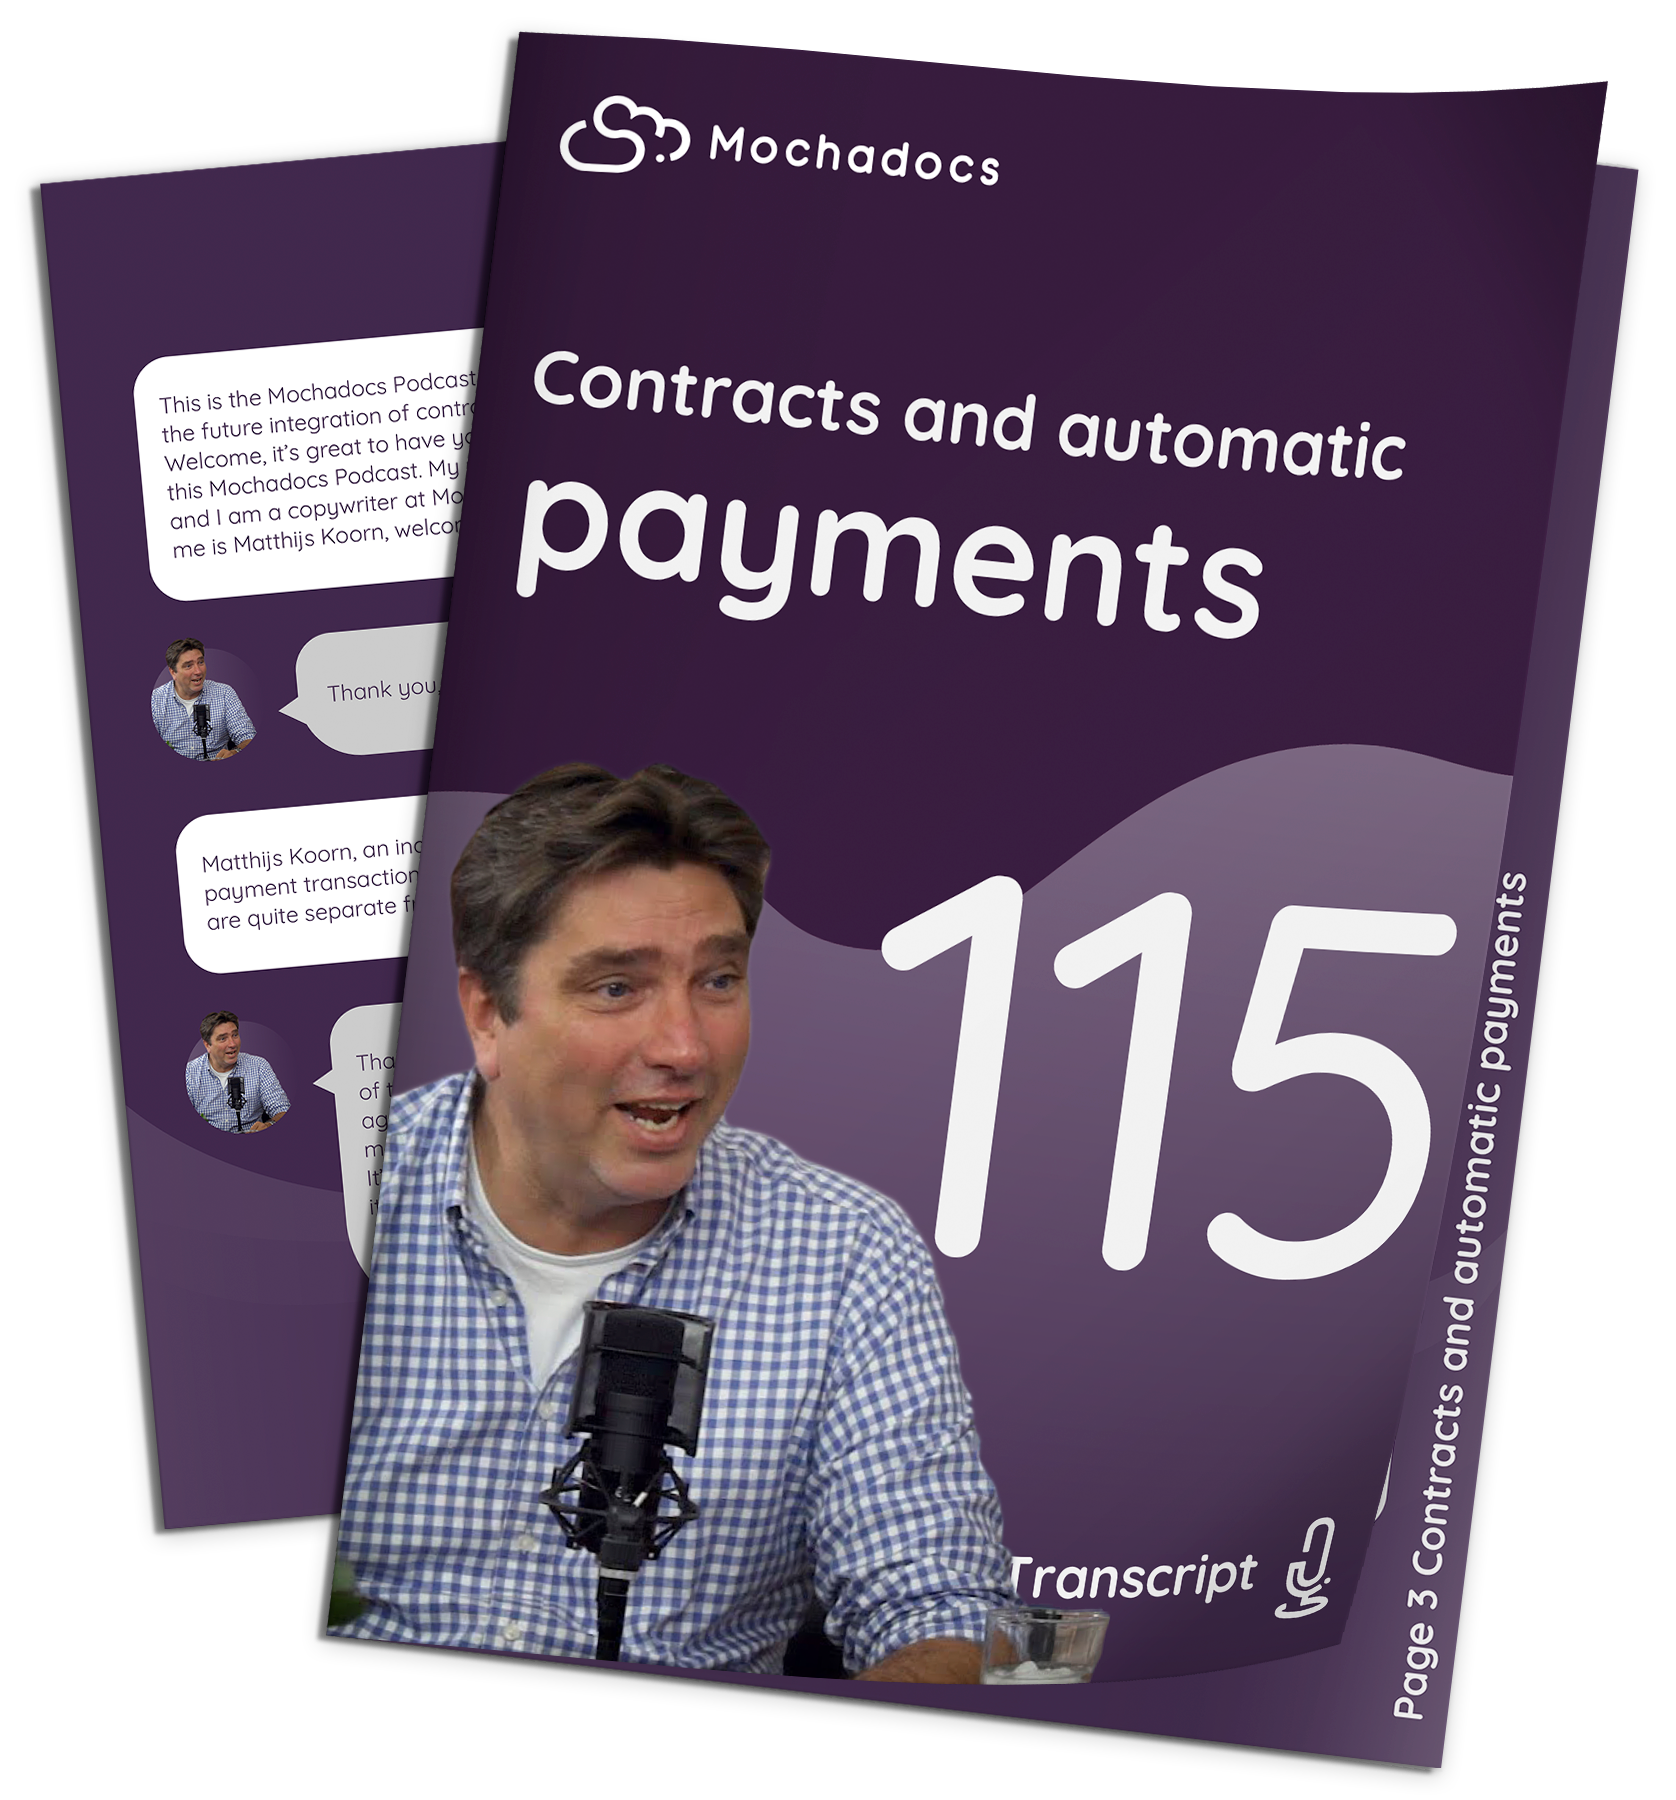 Mochadocs - Contract Lifecycle Management - Transcripts - Contracts and automatic payments